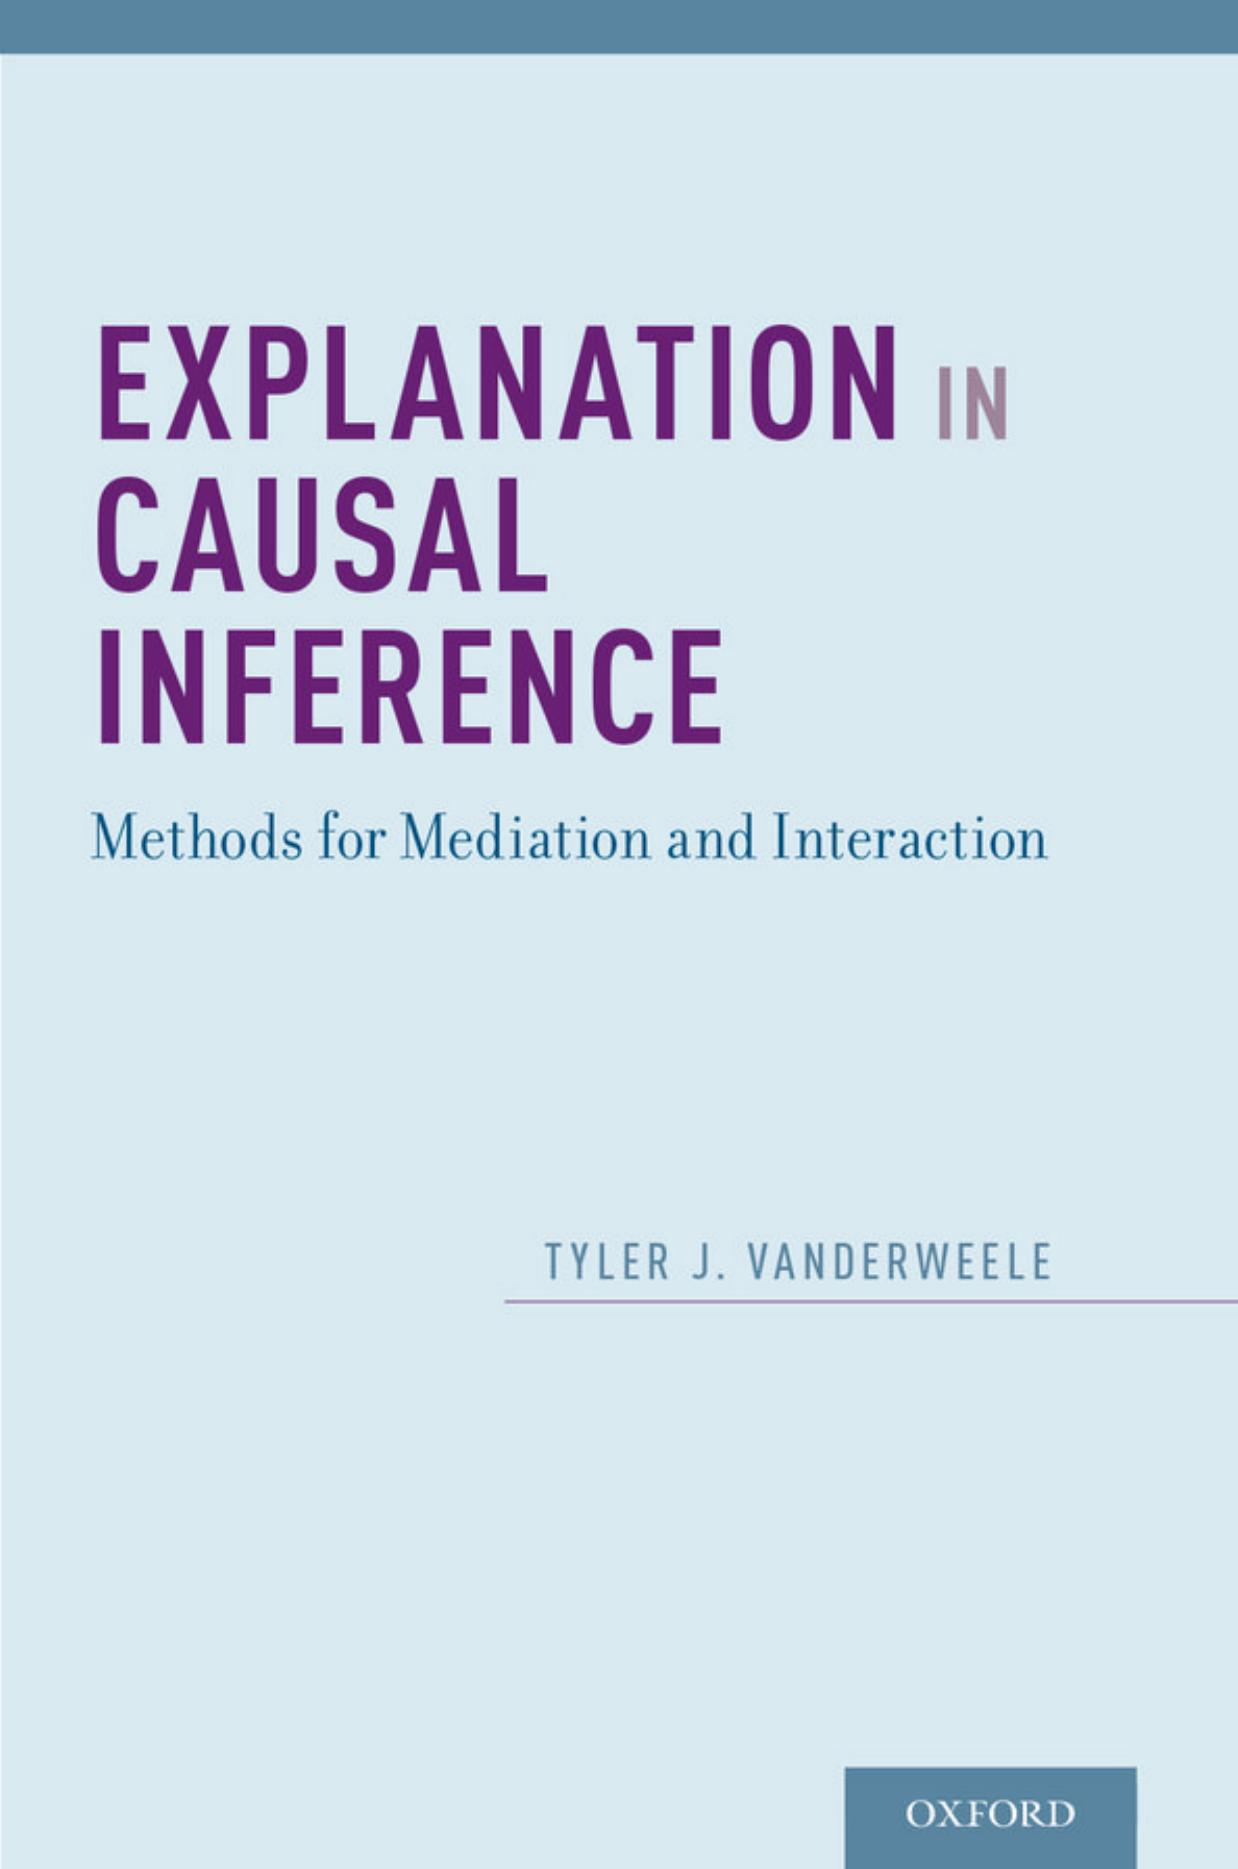 Explanation in Causal Inference: Methods for Mediation and Interaction